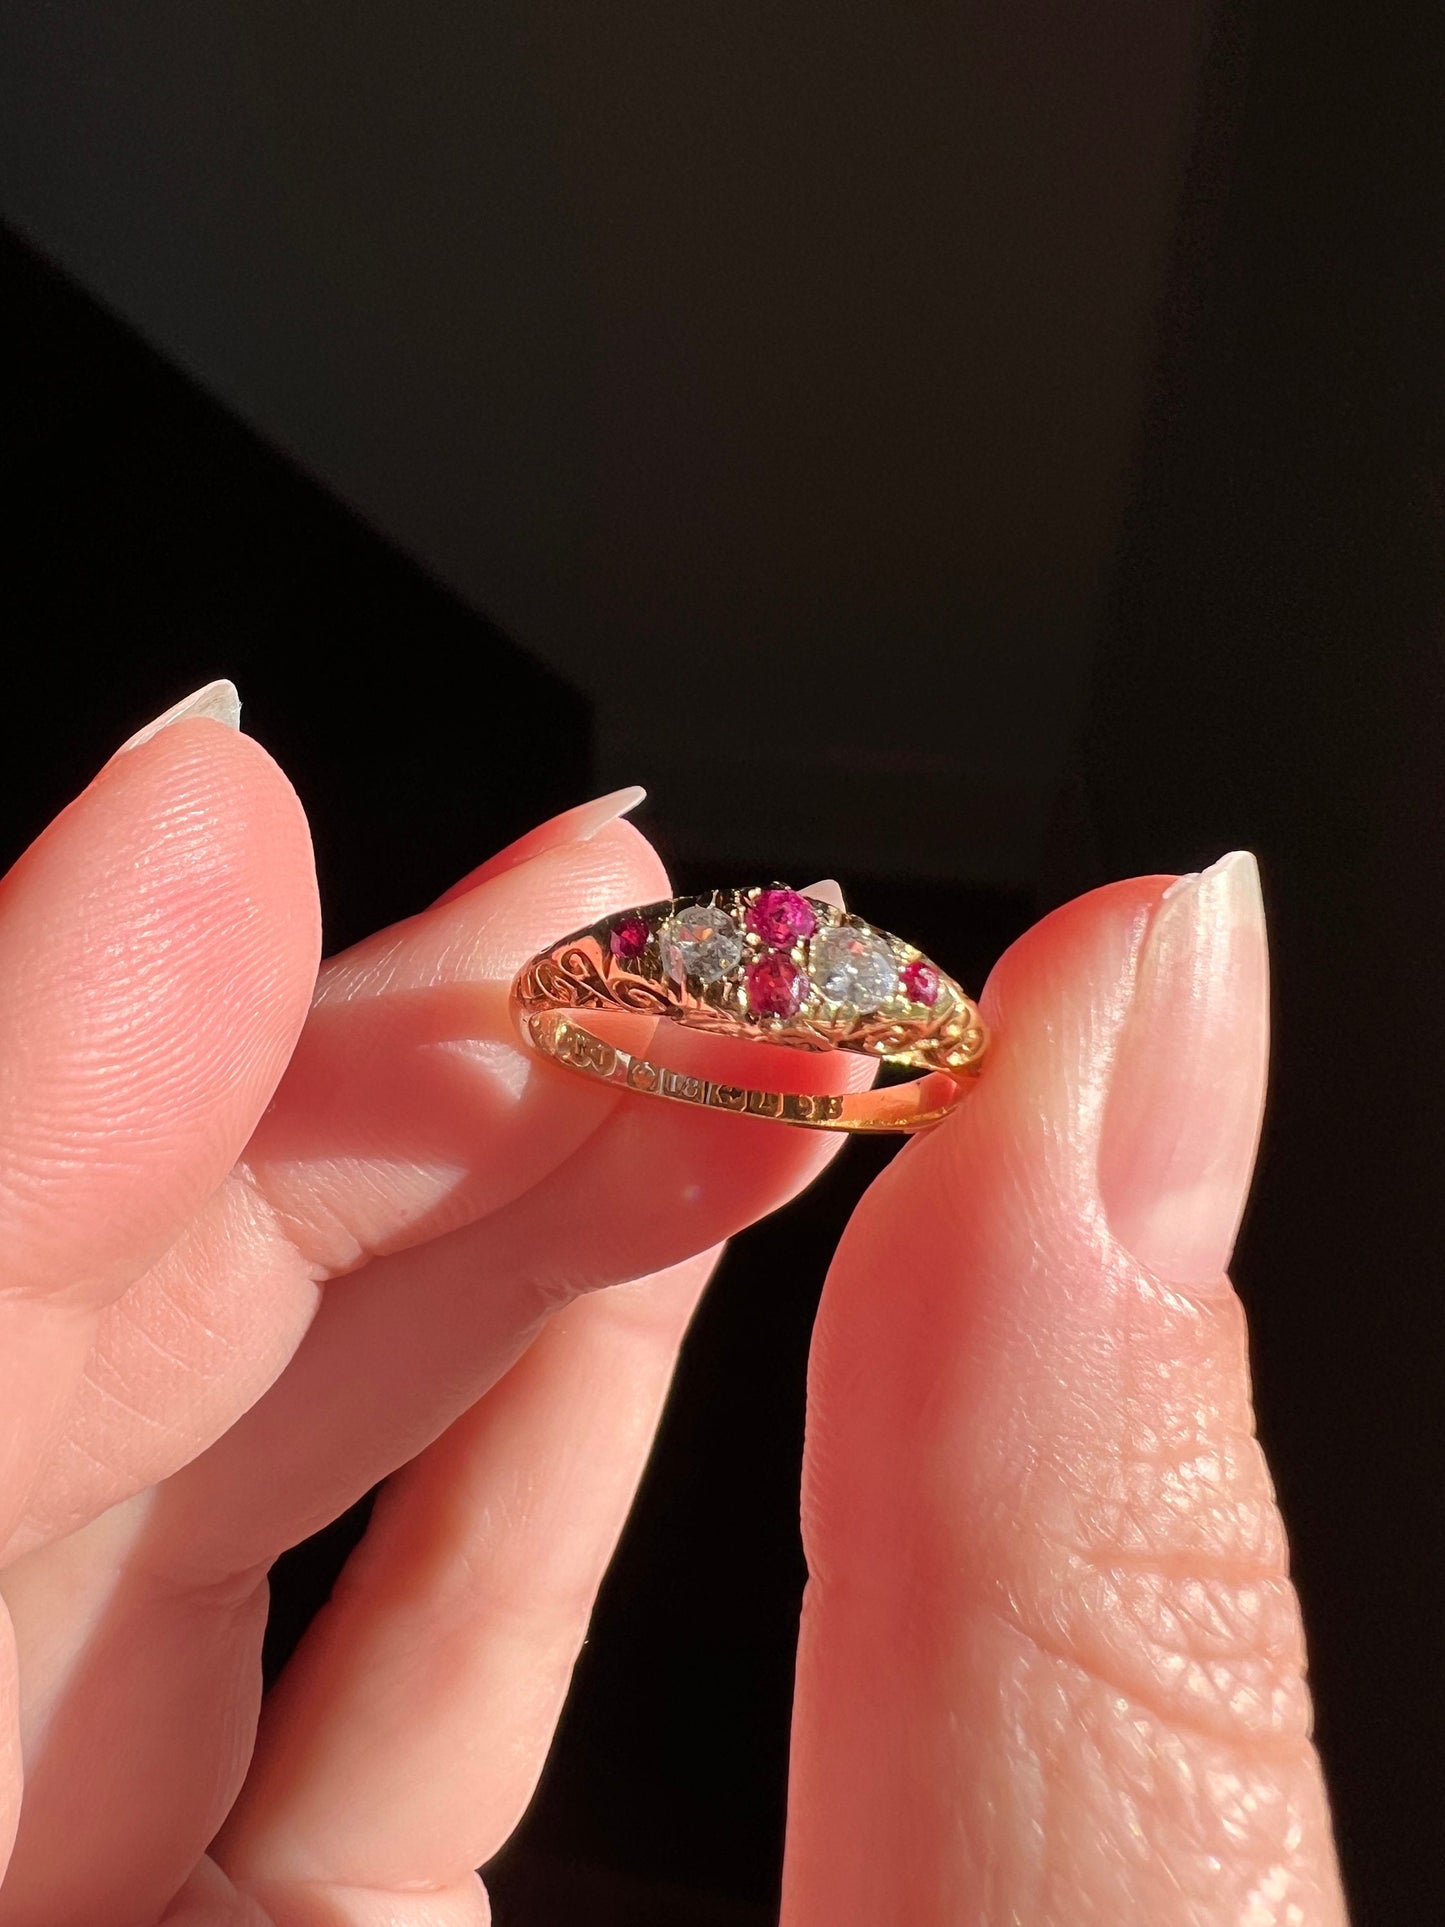 Scrolled Victorian Antique Ruby Old Mine Cut DIAMOND Stacker Band Ring 18k Gold Red Pink Romantic Gift Minimalist Skinny Ornate Kite